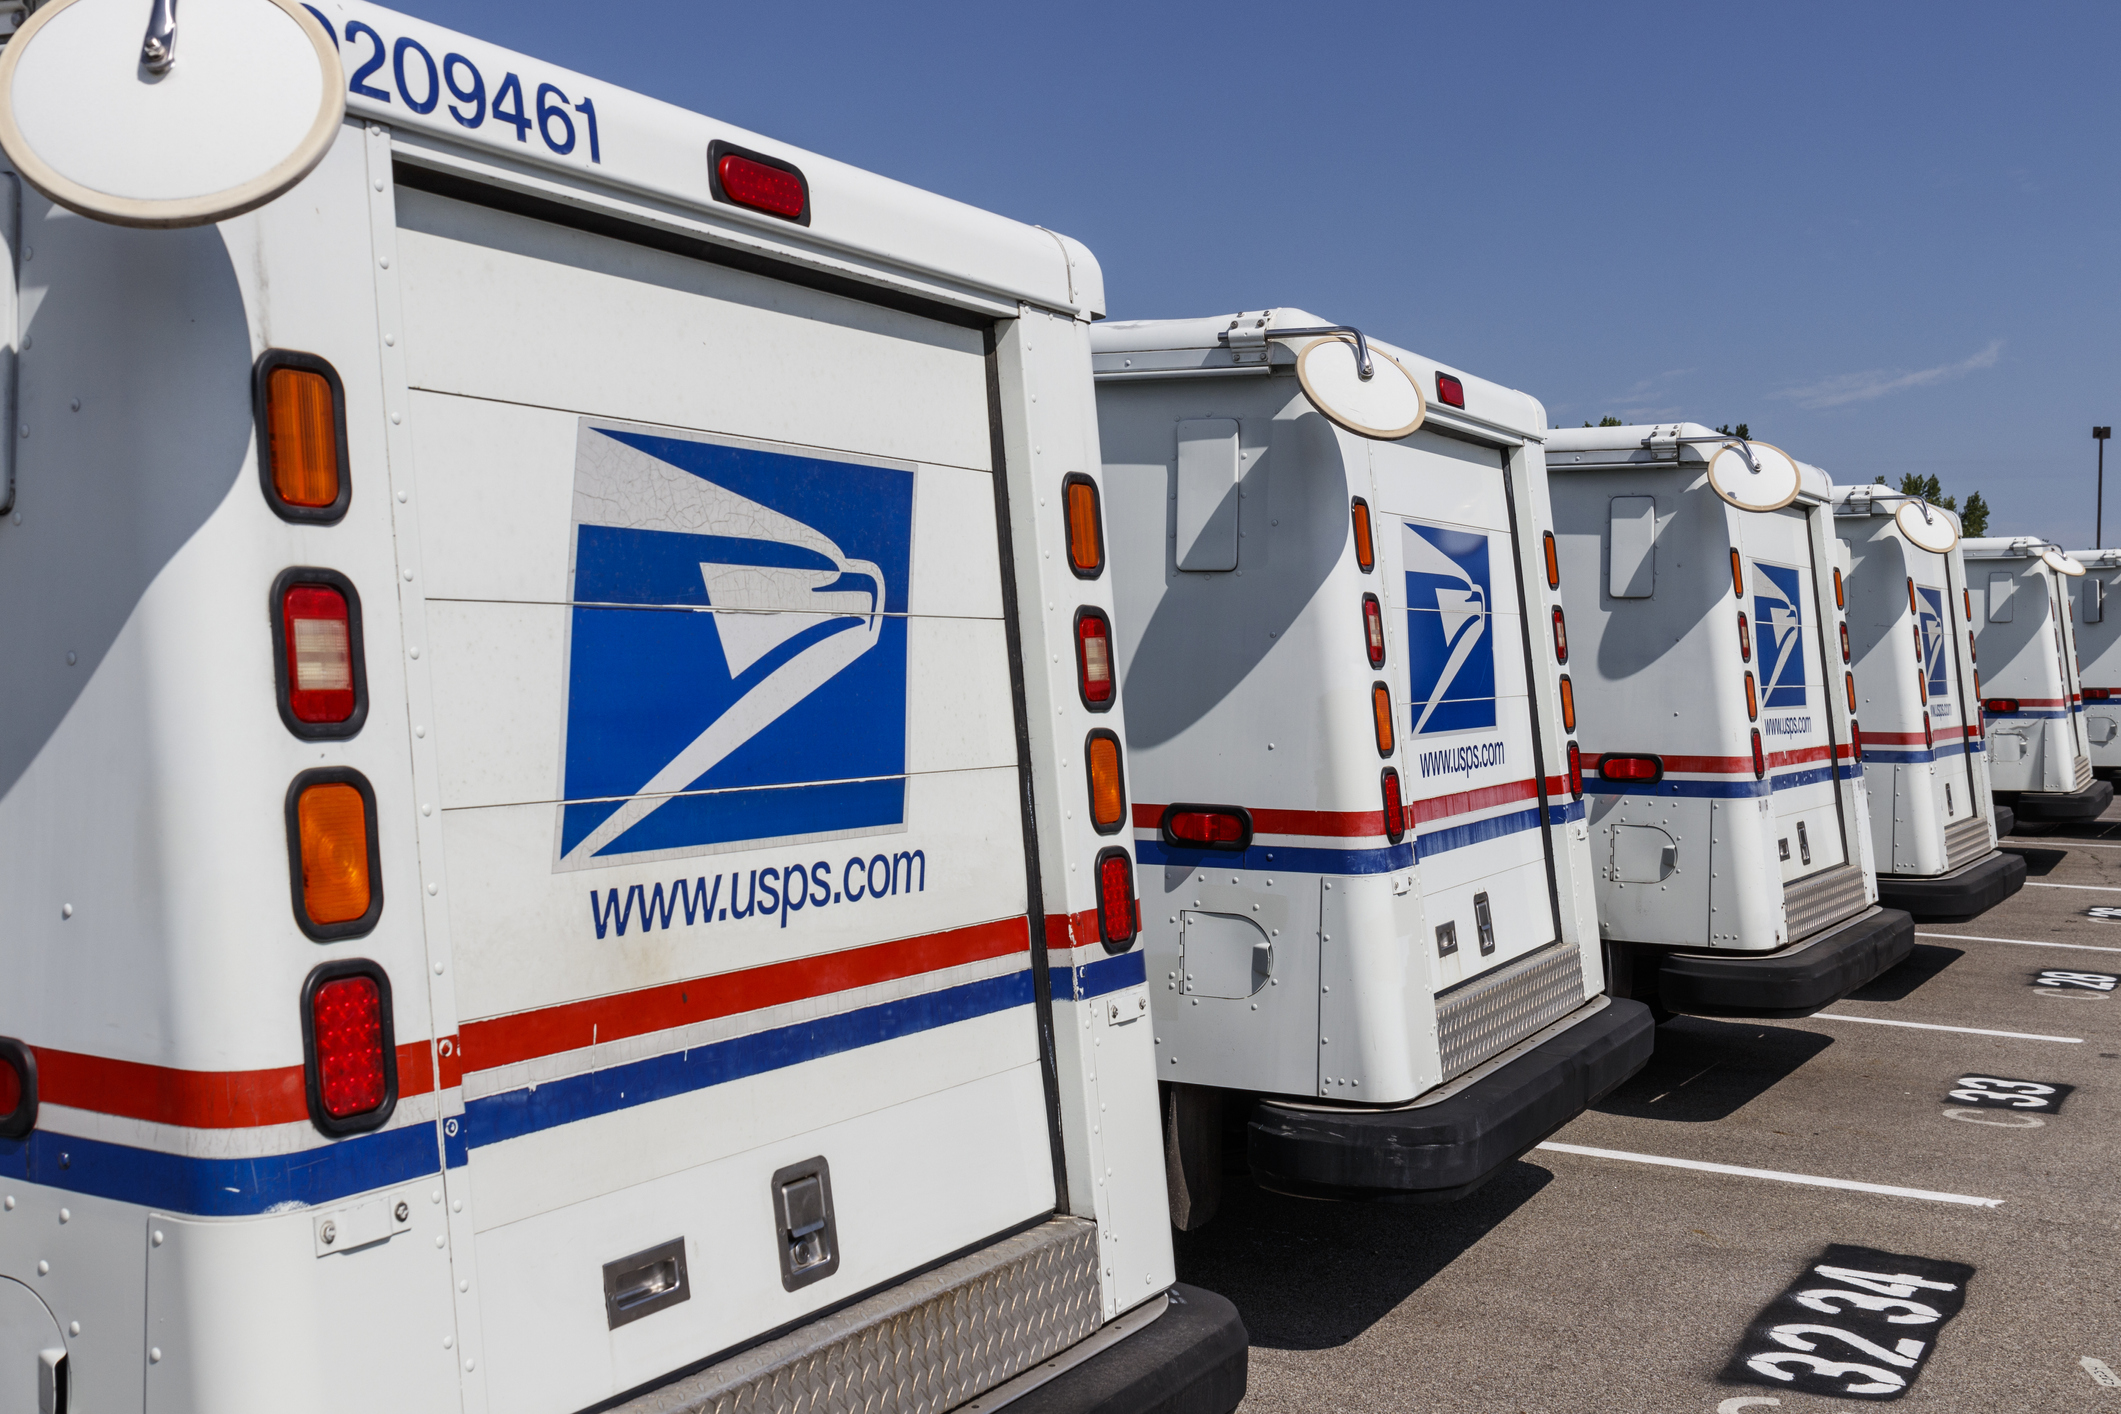 Buena Vista Post Office concludes review of the United States Postal Service’s Universal Service Obligation